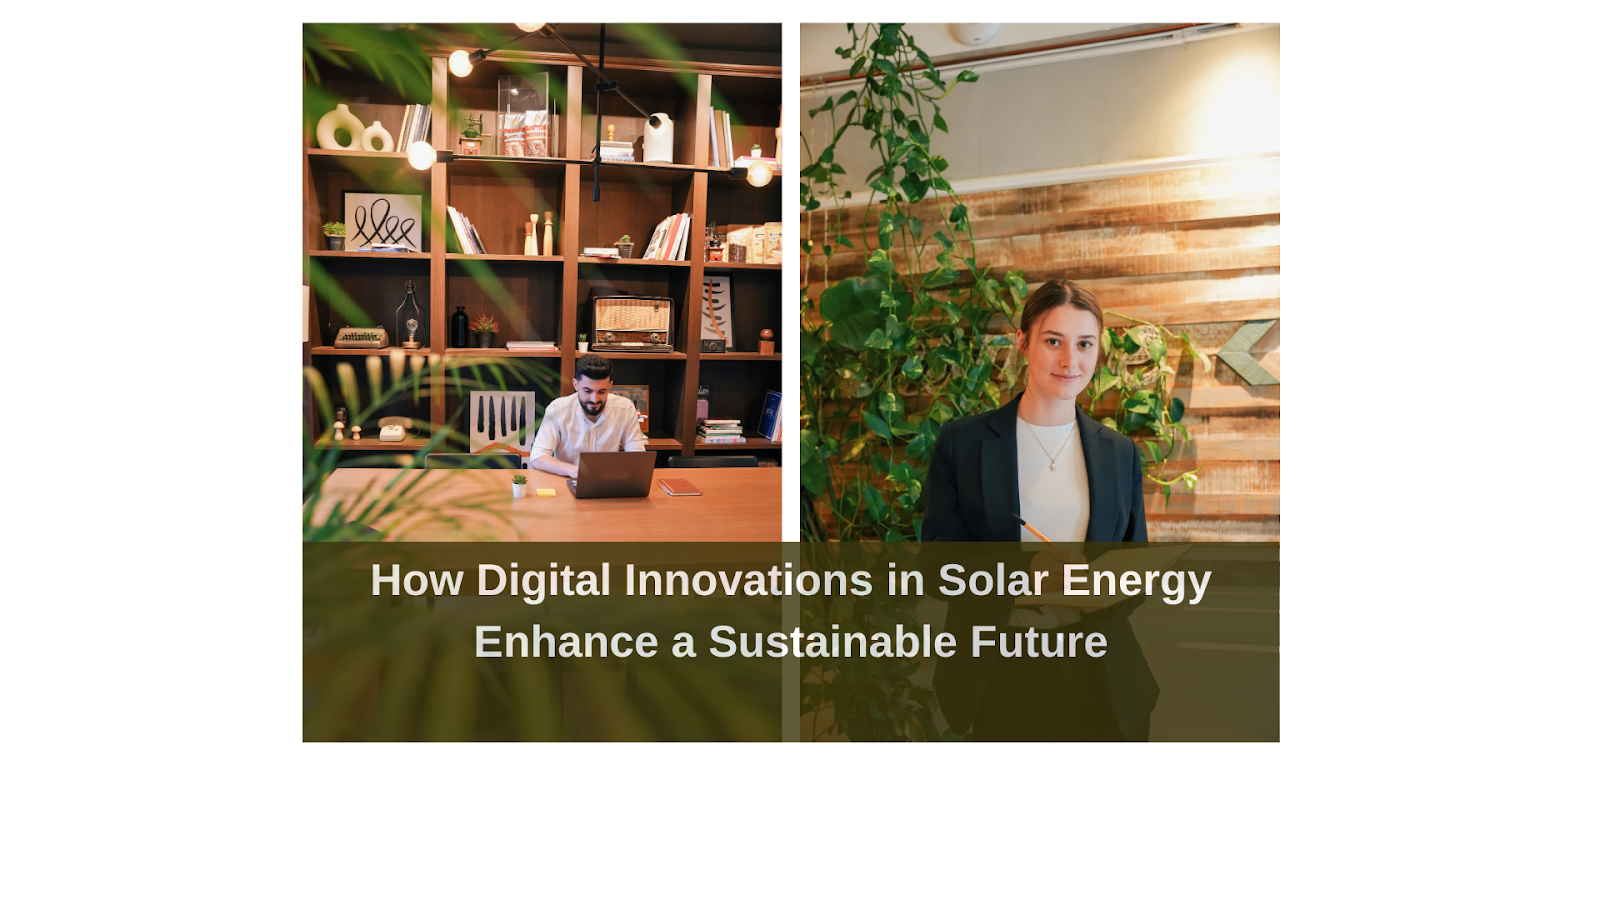 How Digital Innovations in Solar Energy Enhance a Sustainable Future